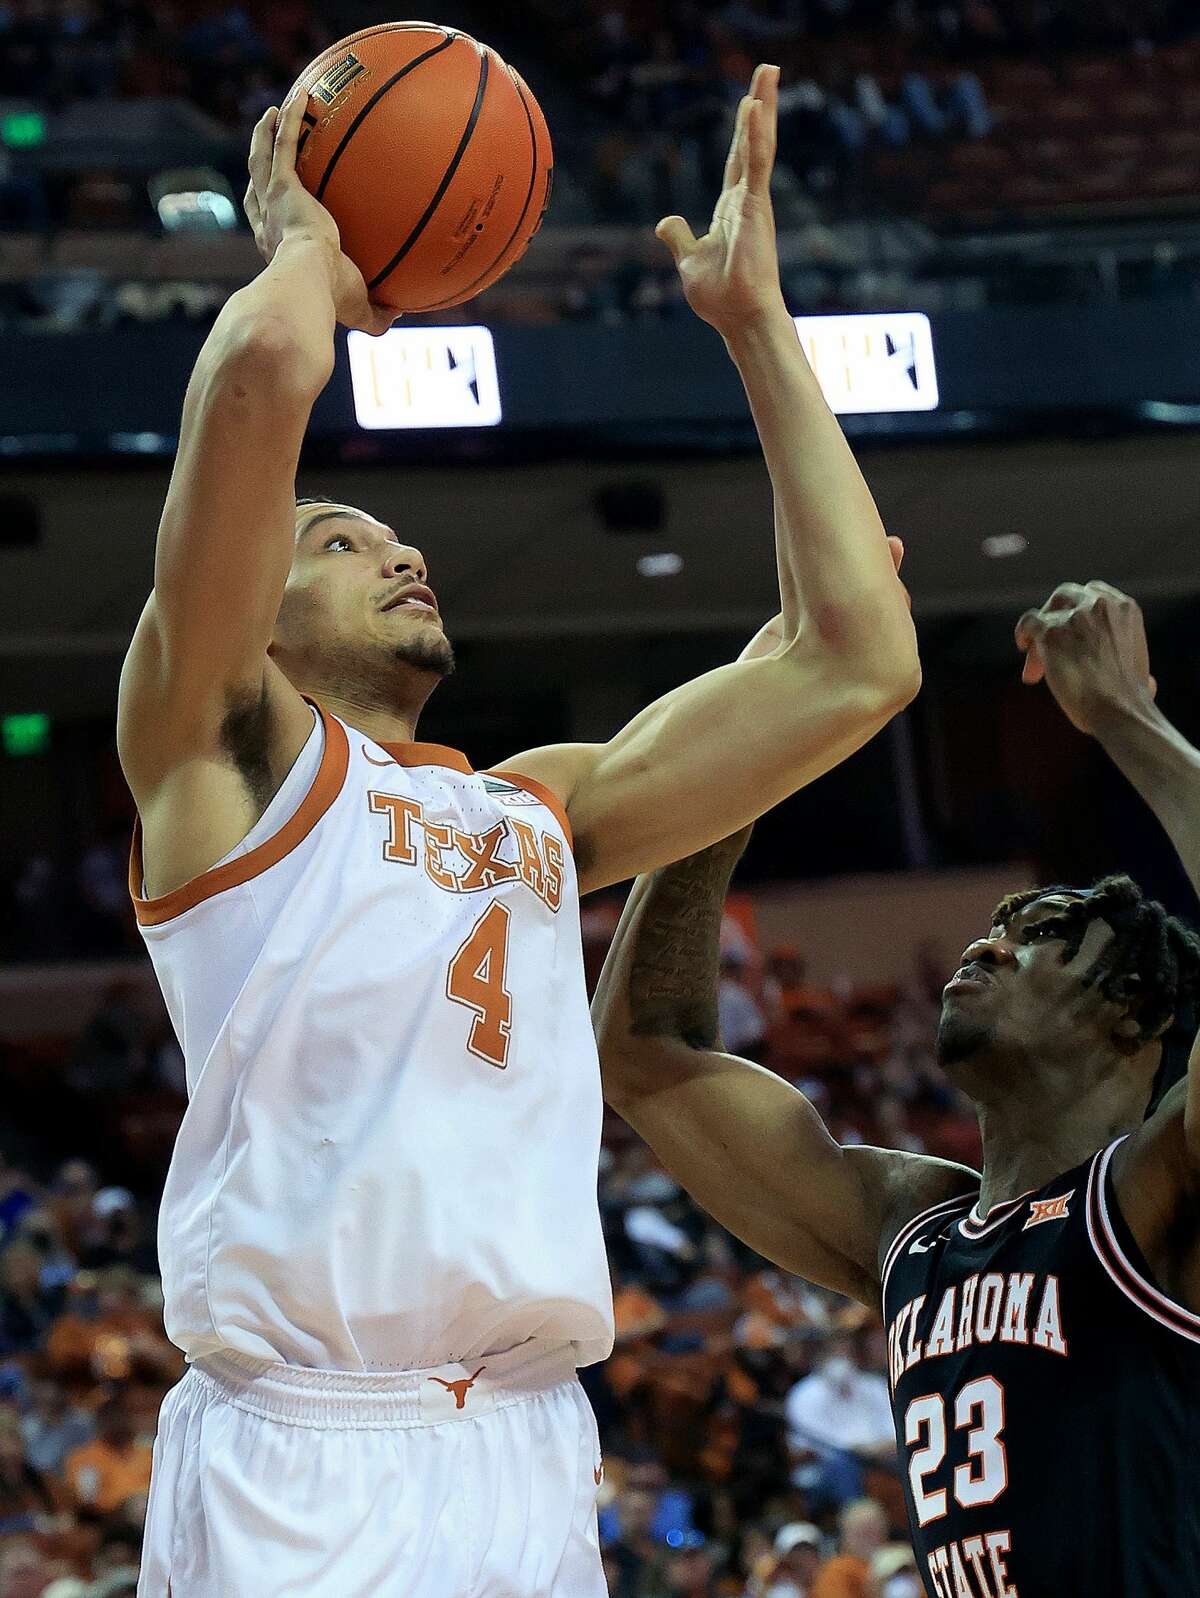 AUSTIN, TEXAS - JANUARY 22: Dylan Disu #4 of the Texas Longhorns shoots over Tyreek Smith #23 of the Oklahoma State Cowboys at The Frank Erwin Center on January 22, 2022 in Austin, Texas. (Photo by Chris Covatta/Getty Images)